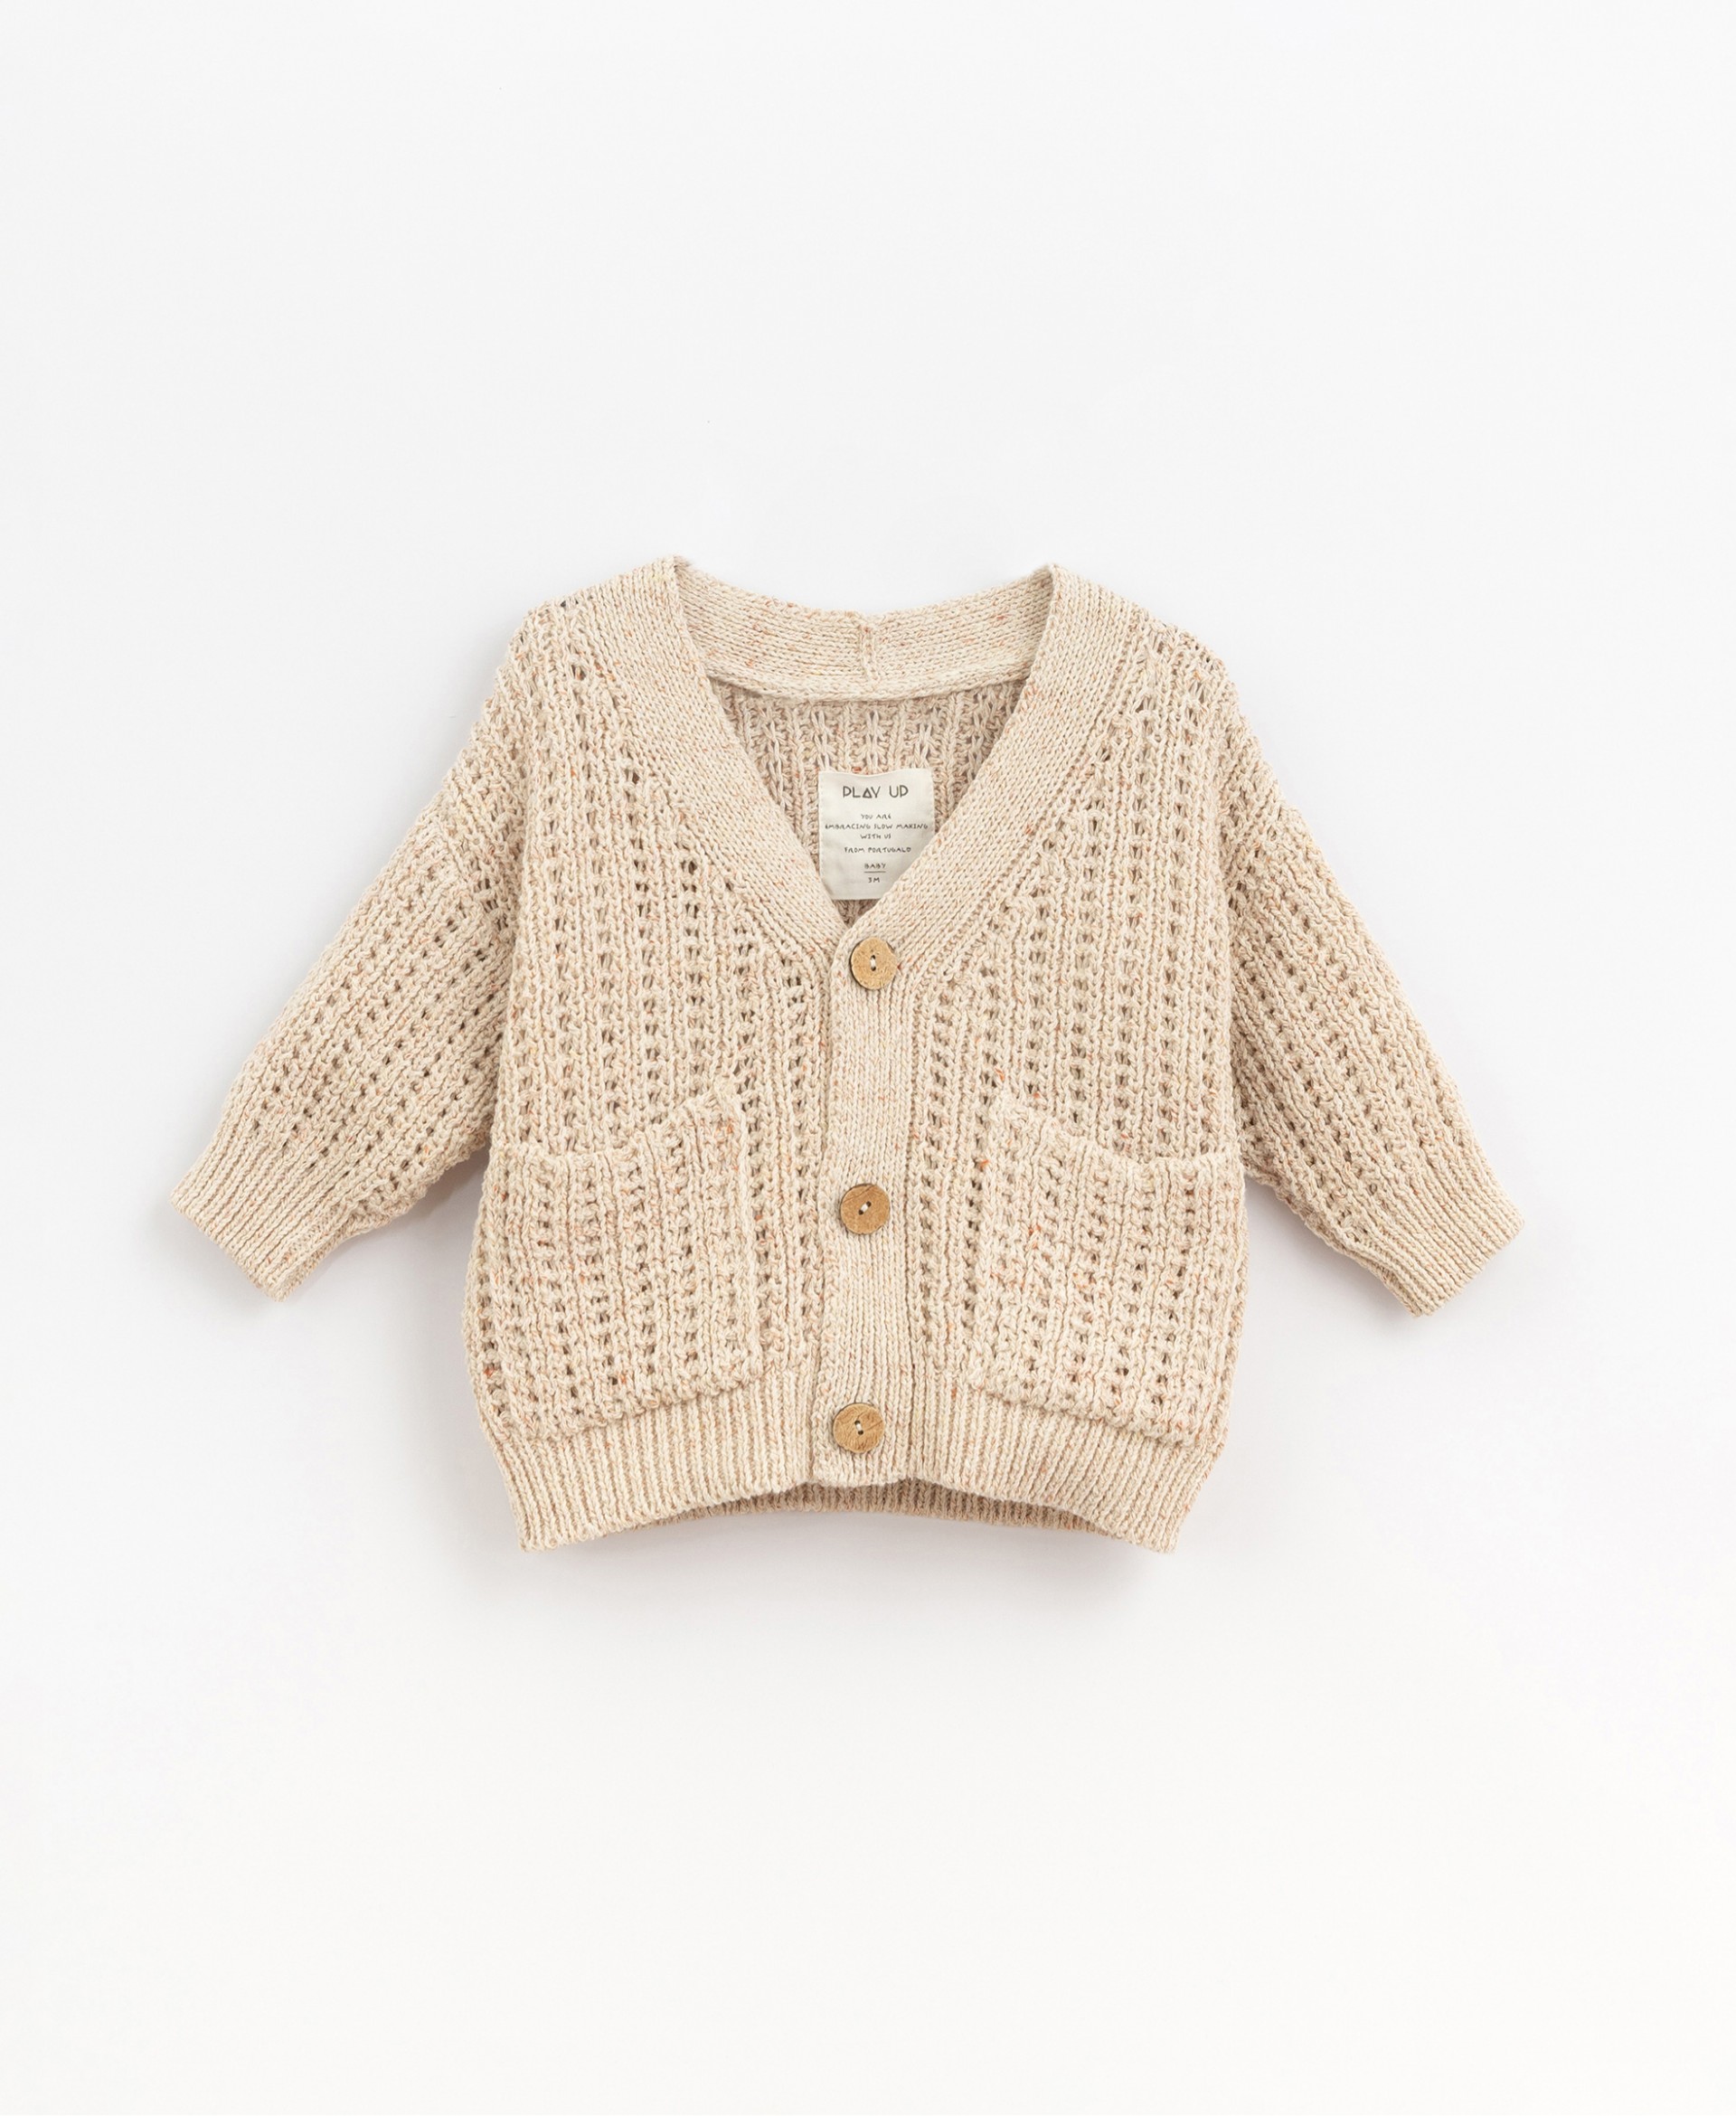 Knitted jacket in recycled fibers | Basketry